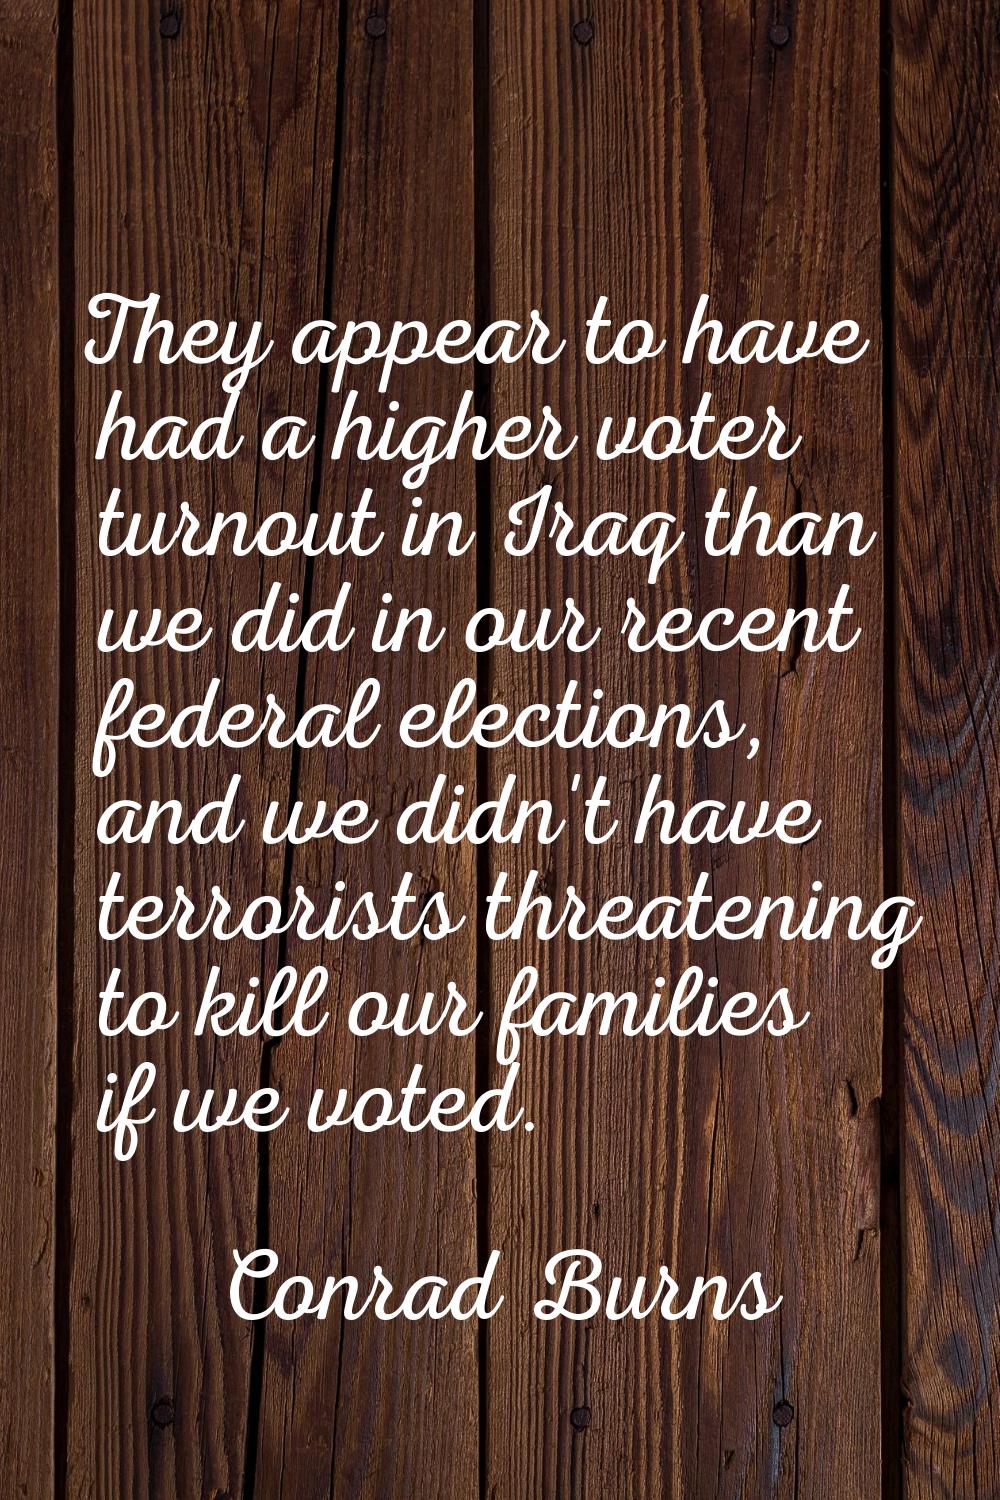 They appear to have had a higher voter turnout in Iraq than we did in our recent federal elections,